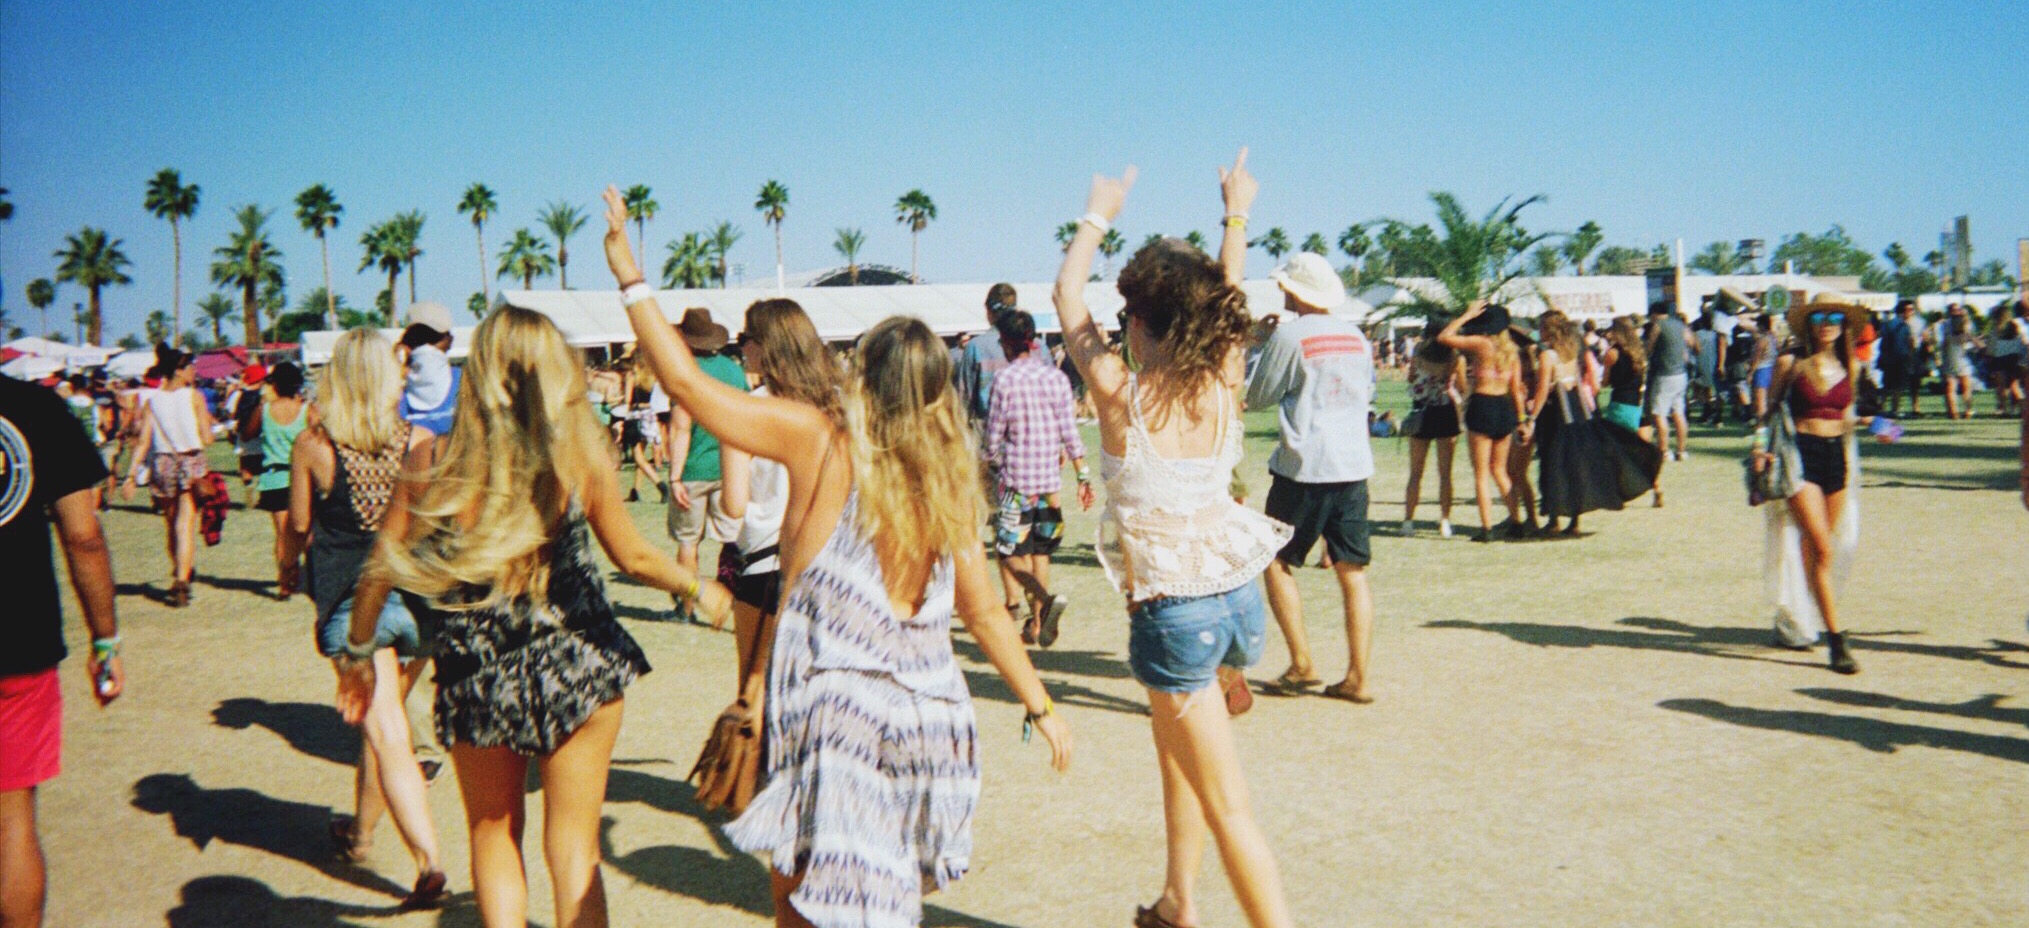 How to Make Your Festival Experience a Fan Favorite - Eventbrite